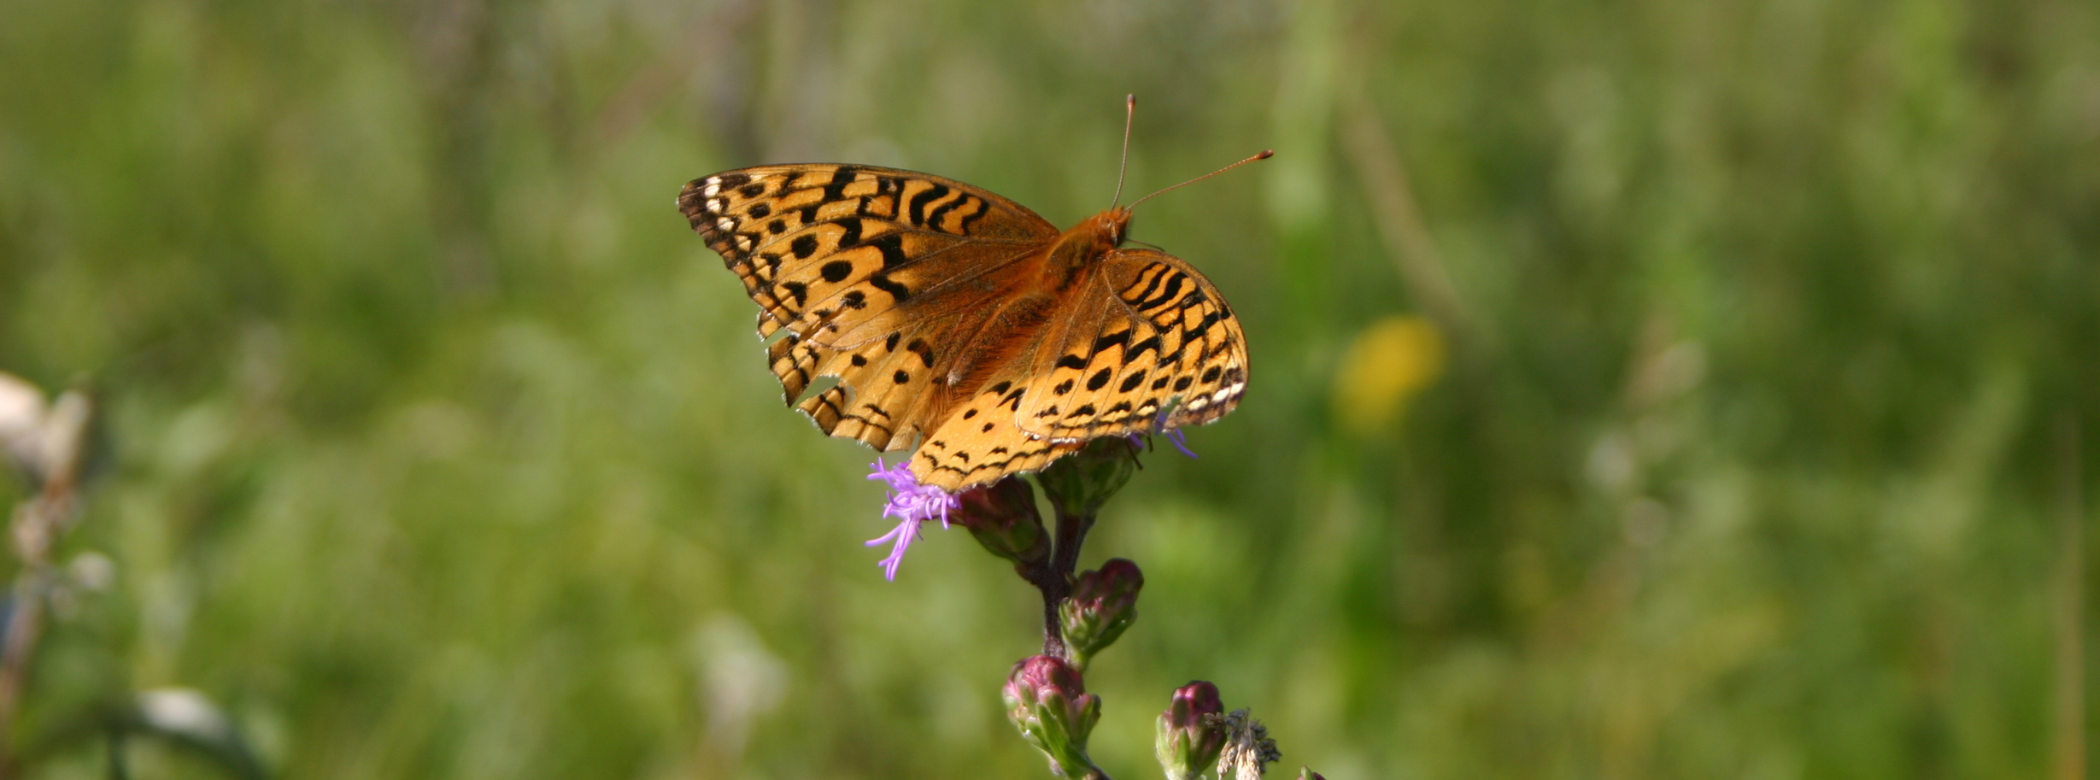 Close-up on an orange butterfly with black markings on its wings, perched on a fluffy purple flower.